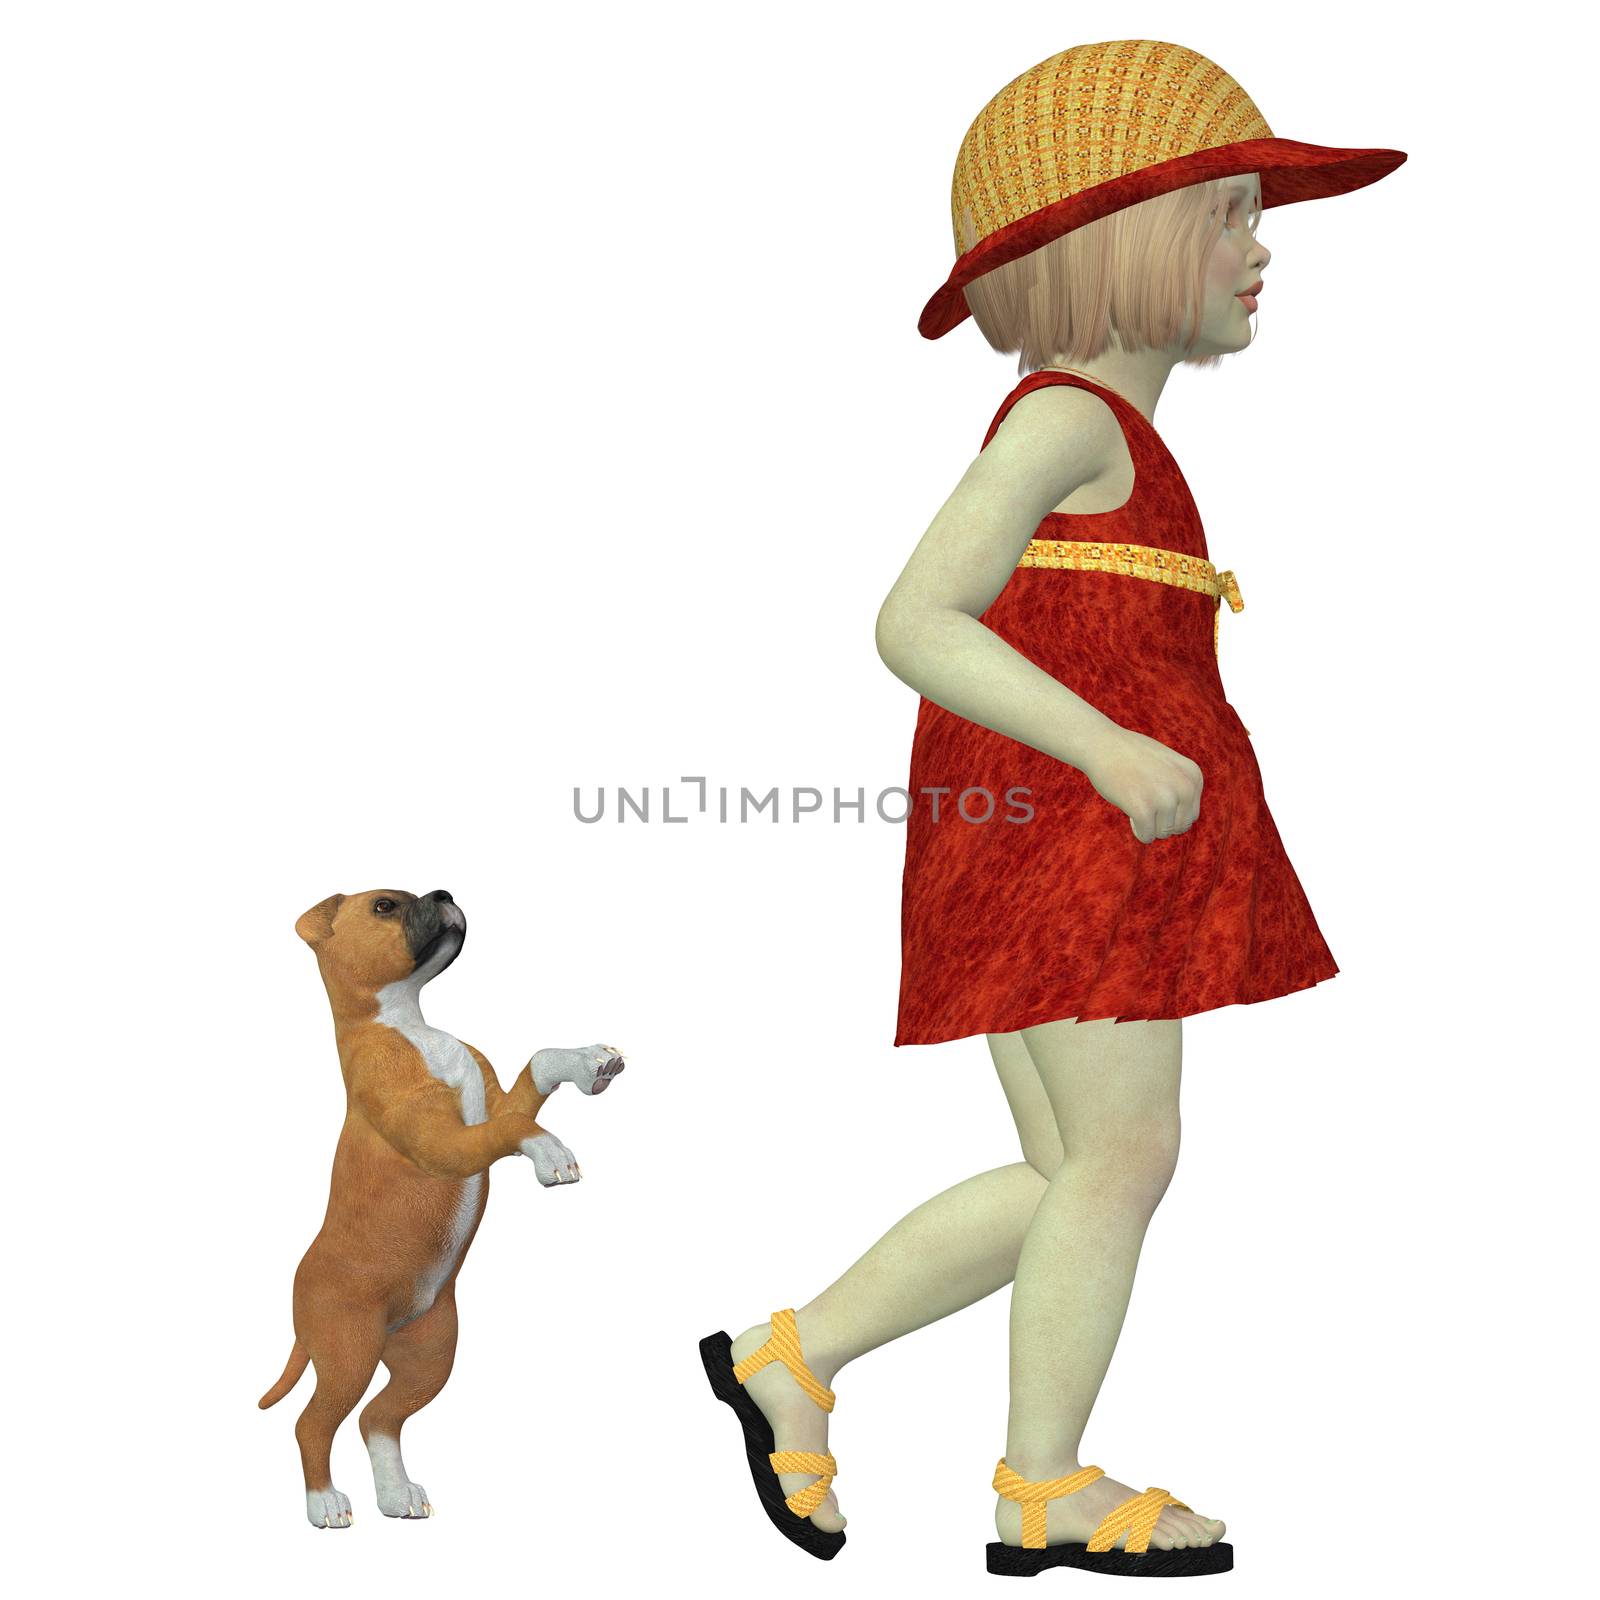 A Boxer puppy still wants to play as Eliza in an orange dress and hat is called by mom to come home.